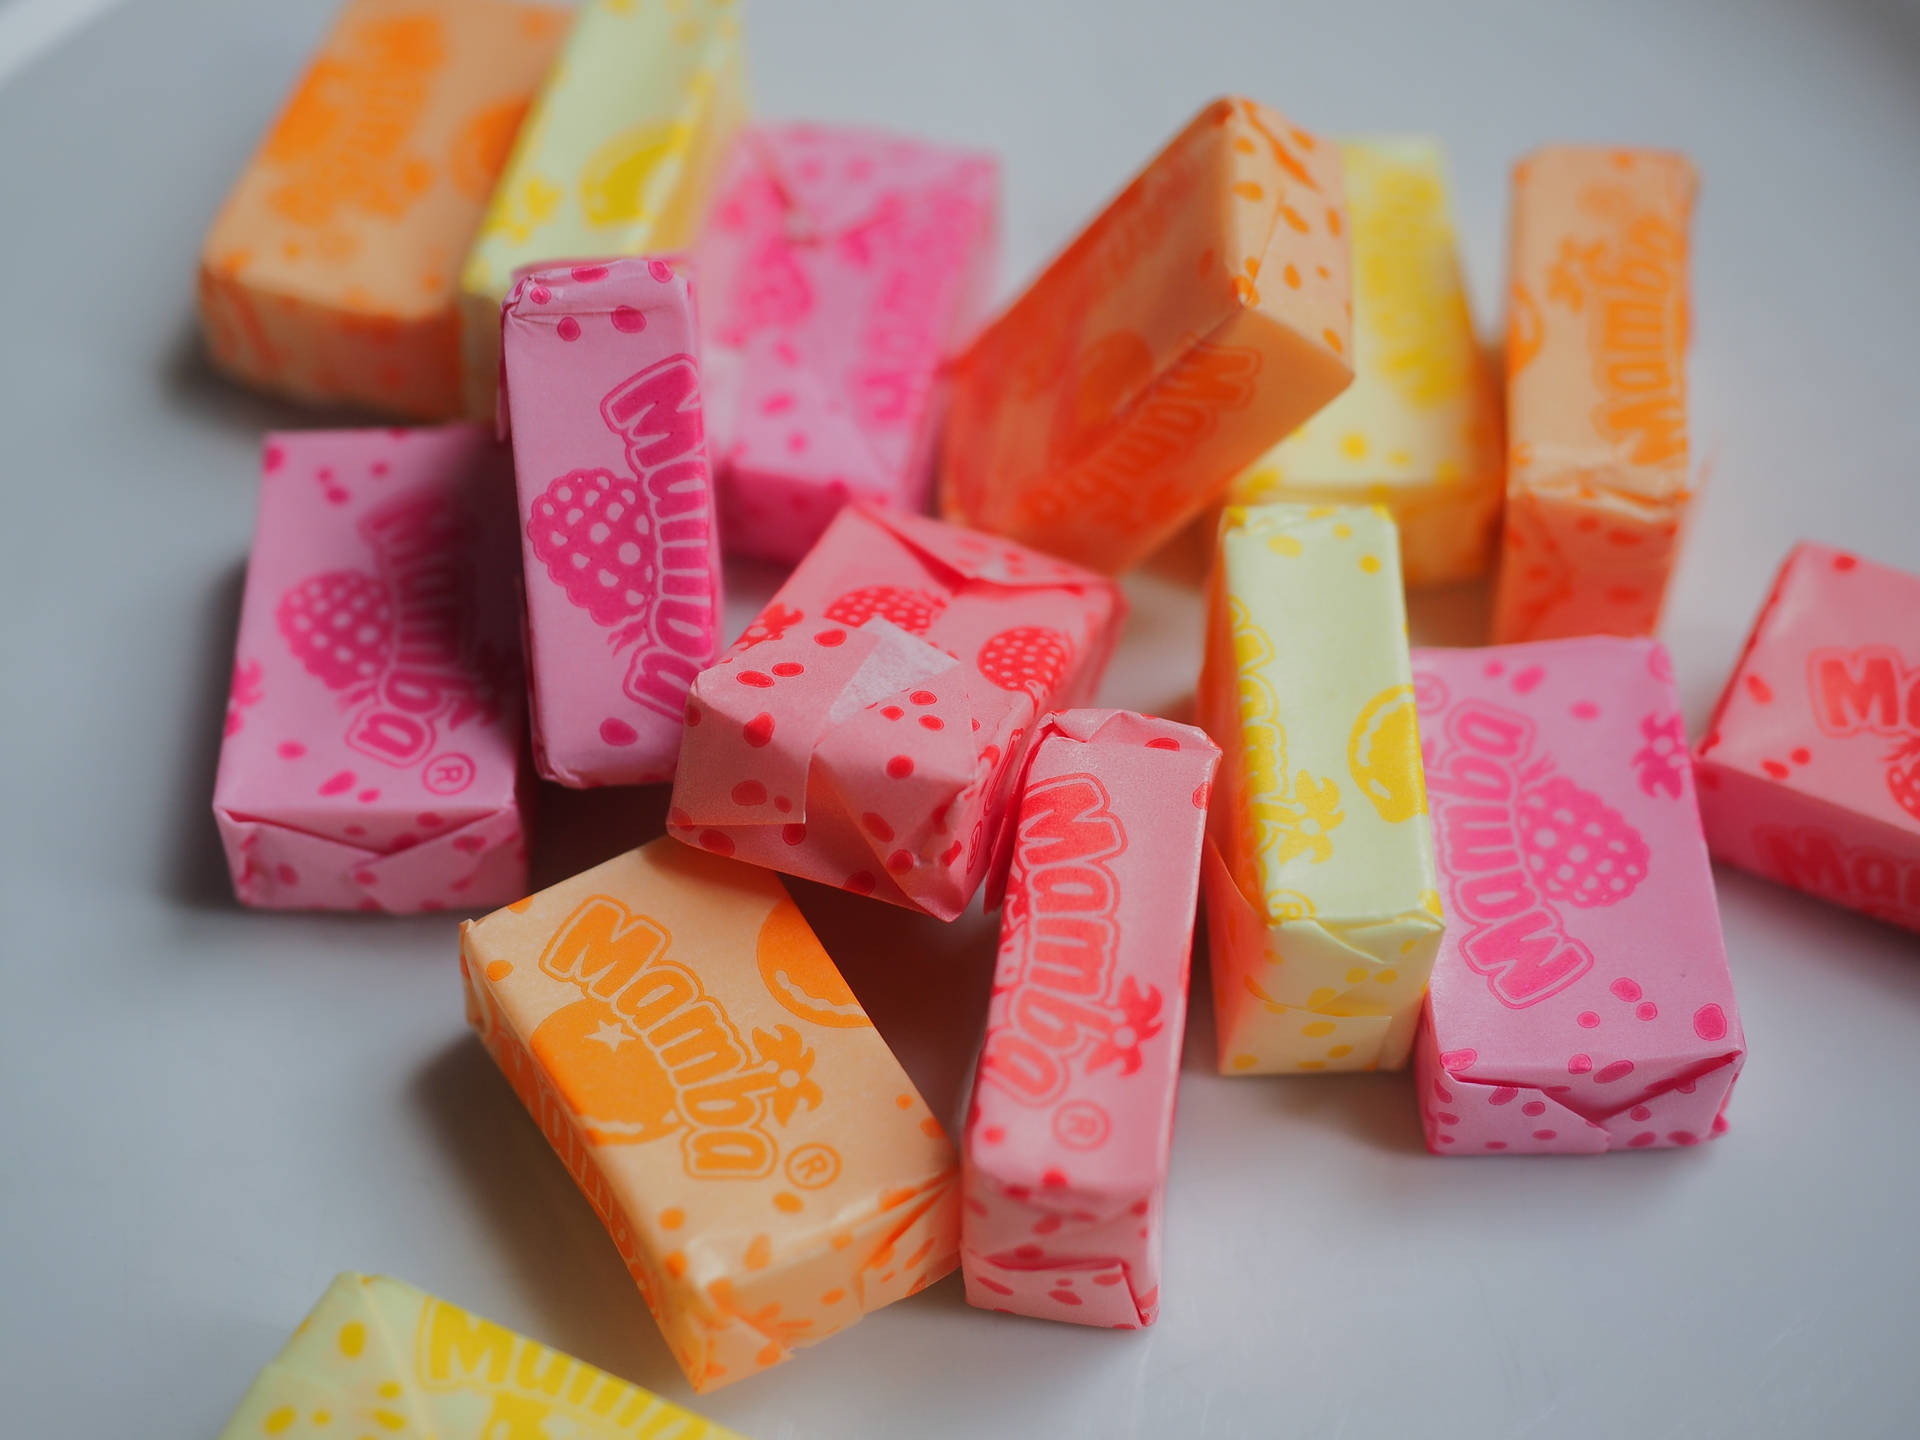 Chewy Mamba Candies Different Flavors Wallpaper